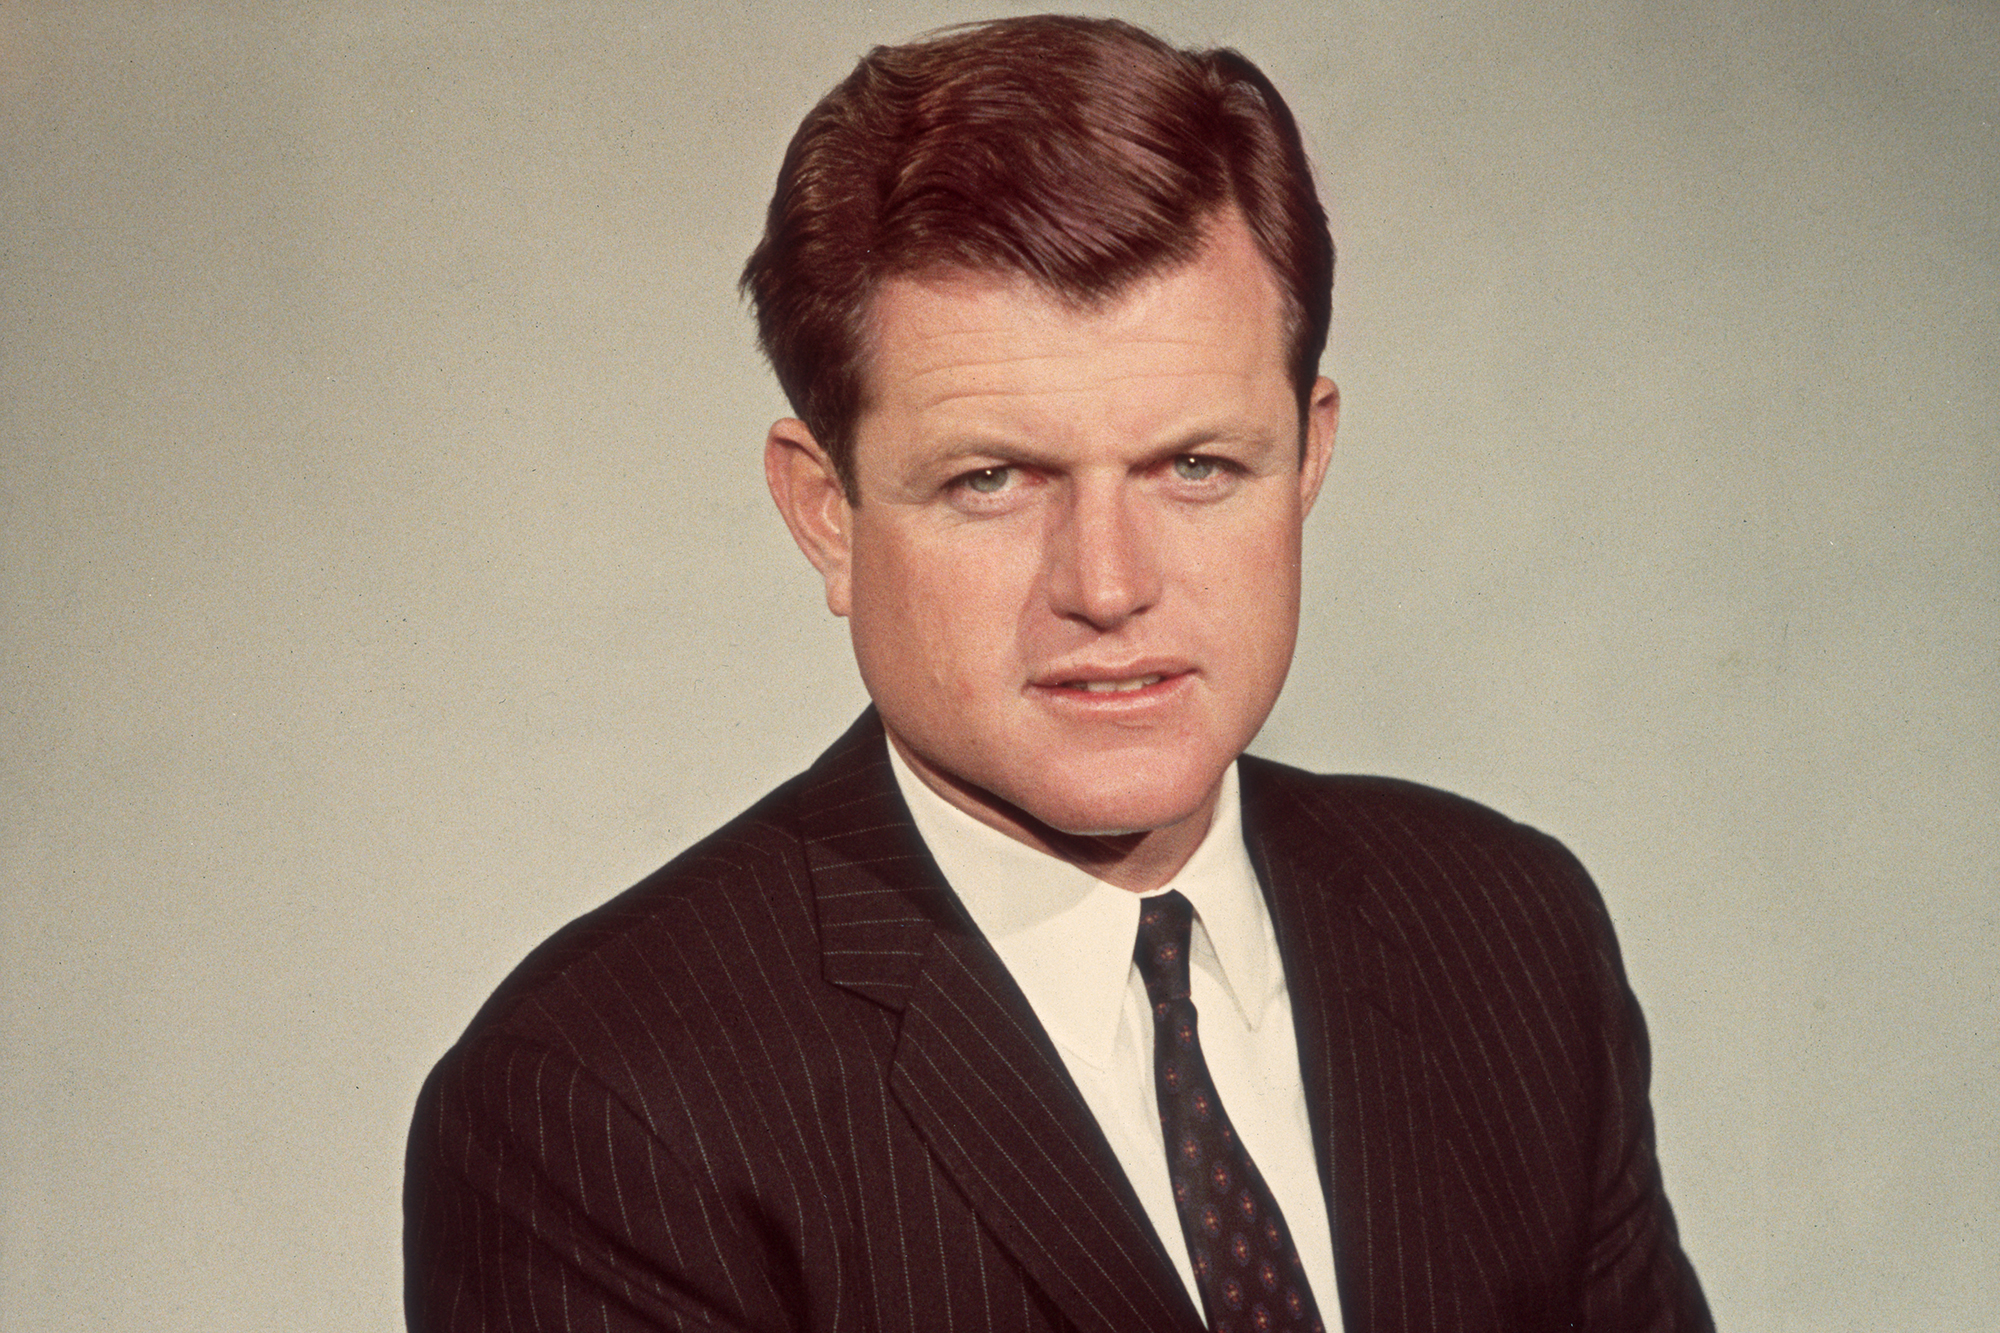 celebrities who committed crimes - Teddy Kennedy drunk driving a young lass to her watery death at Chappaquiddick.